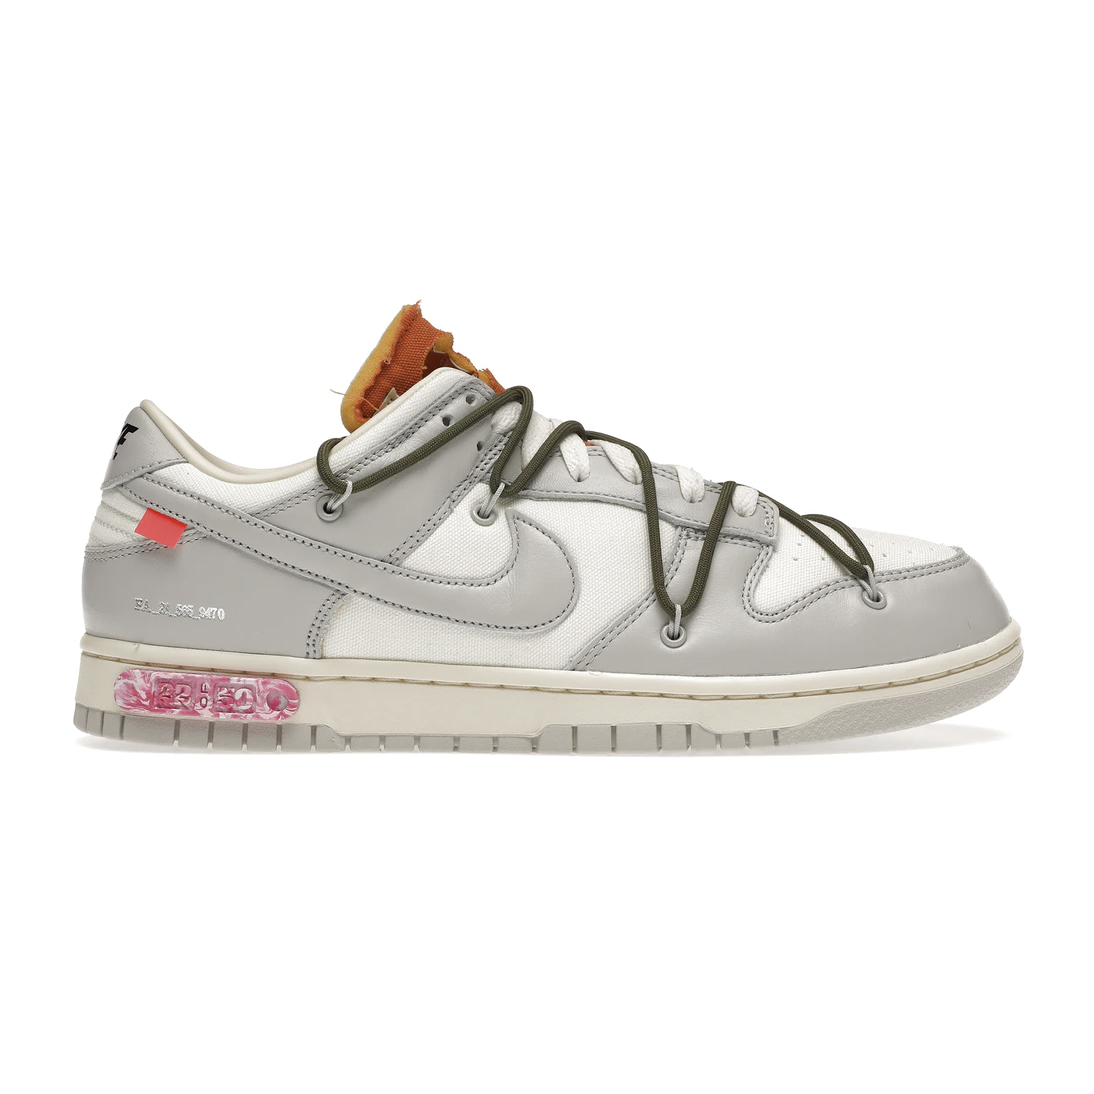 Nike Dunk Low Off-White Lot 22 from Nike